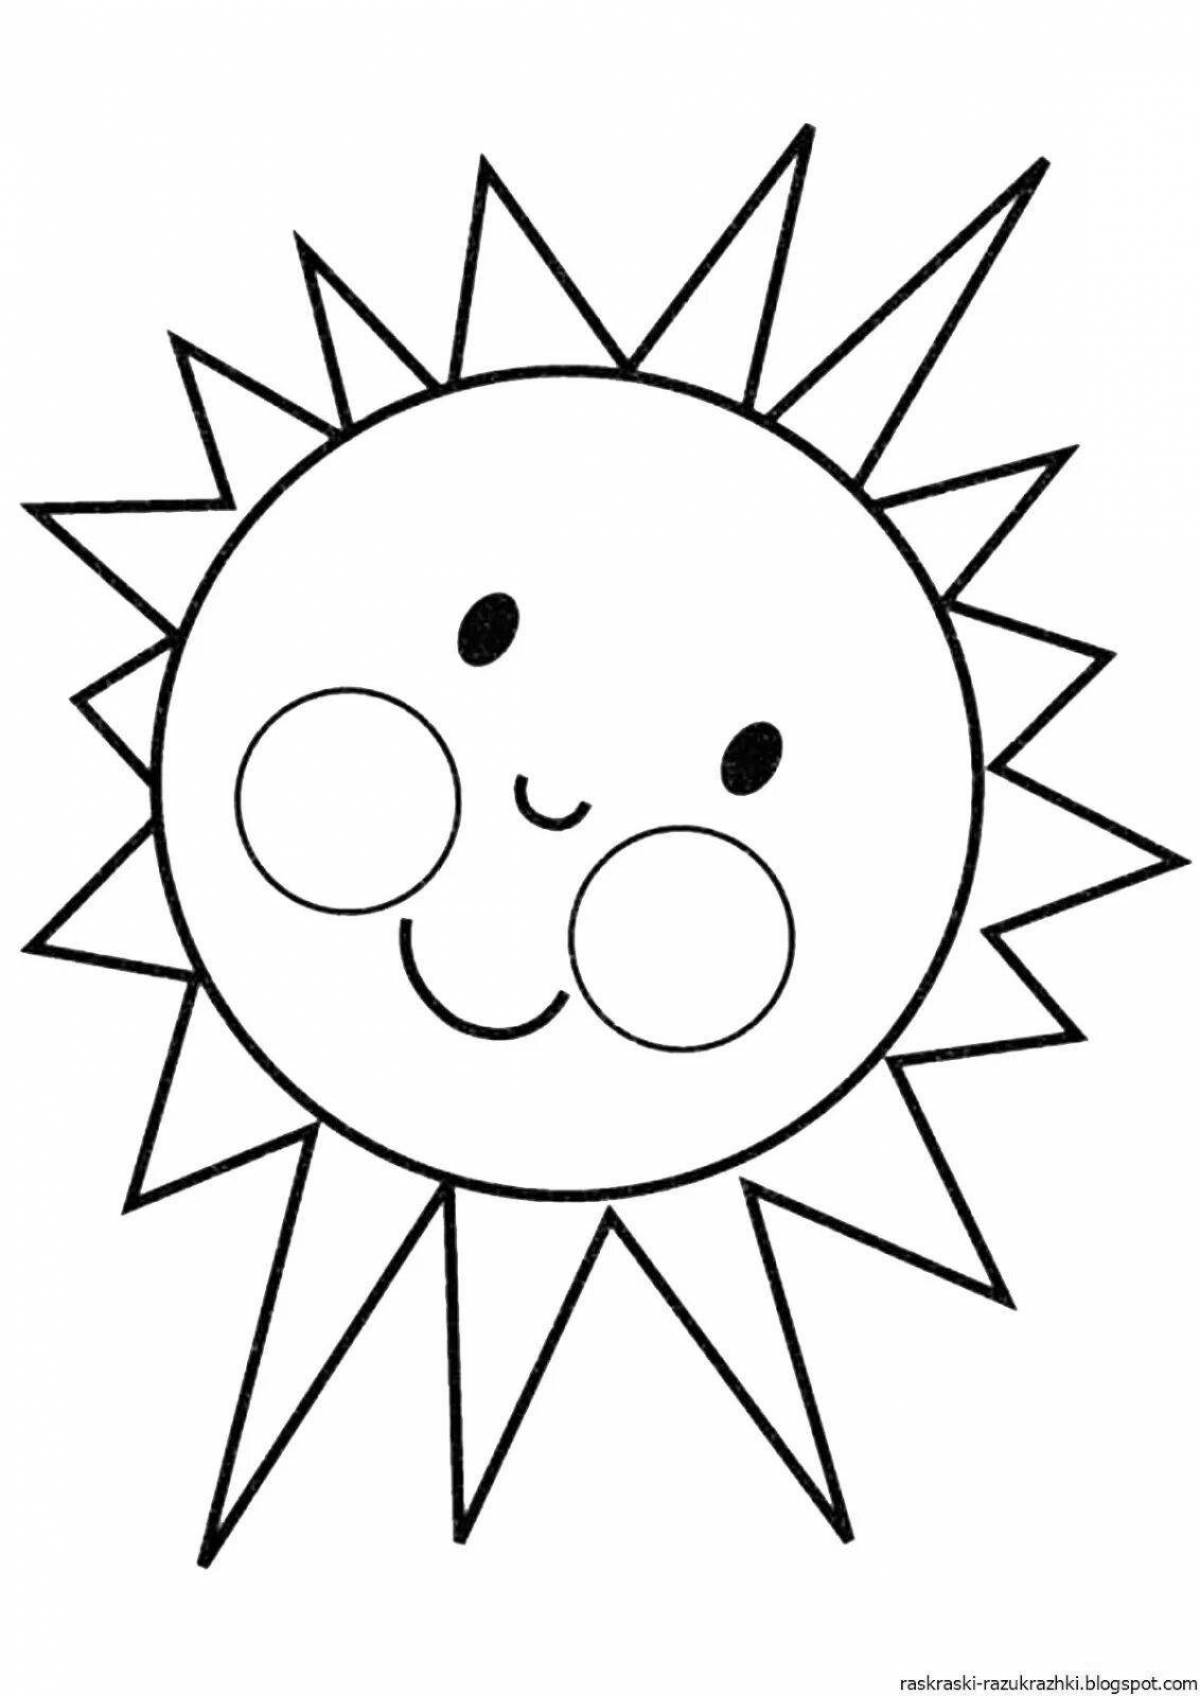 A wonderful sun coloring book for kids